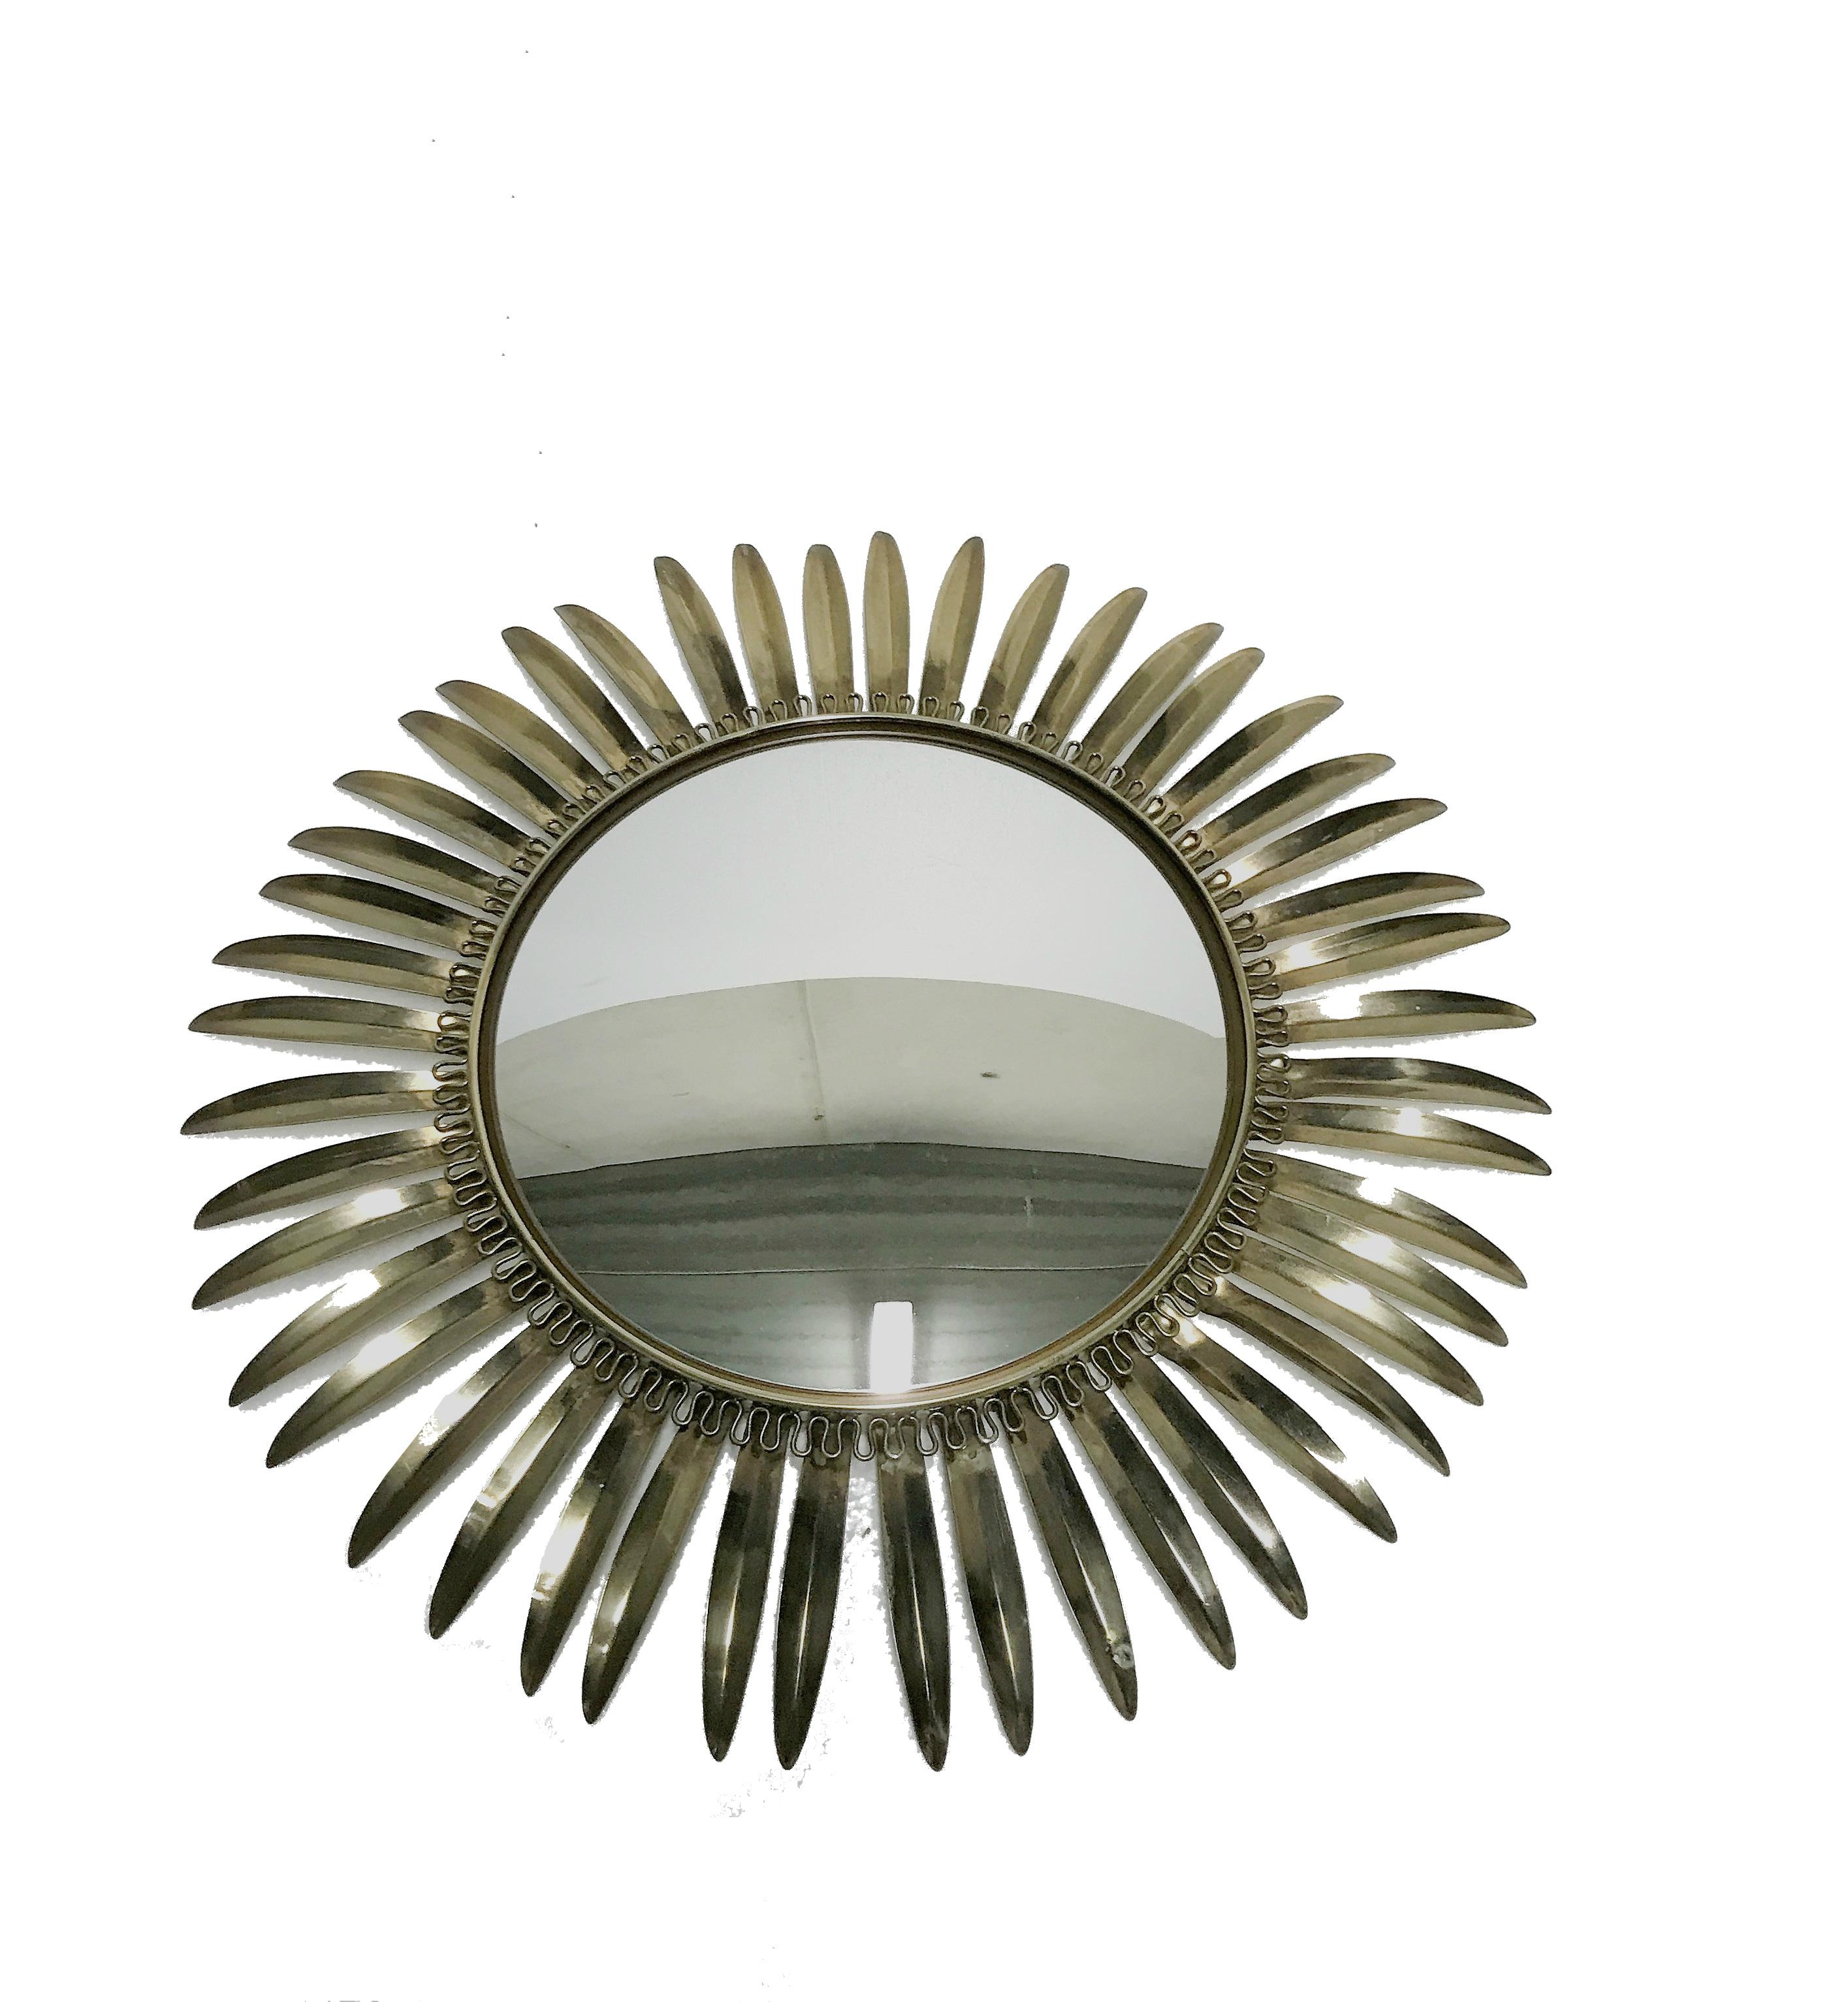 Midcentury brass sunburst mirror with convex glass.

This mirror fits in most interiors and is a perfect add-on for a regency style interior.

The mirror is made from patinated brass.

Good condition.

France, 1960s

Diameter mirror: